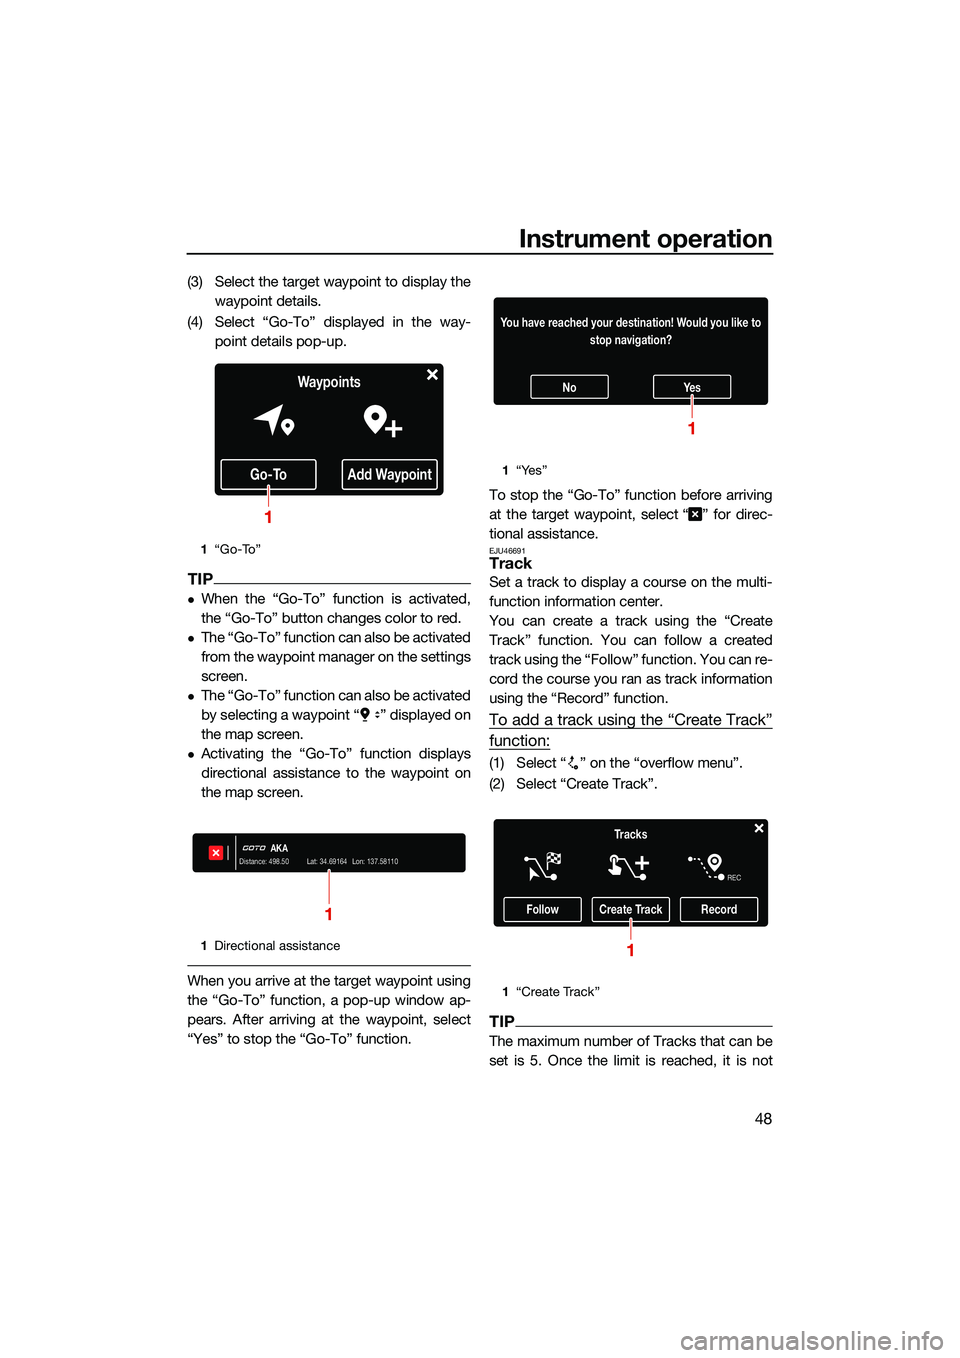 YAMAHA FX SVHO 2022  Owners Manual Instrument operation
48
(3) Select the target waypoint to display thewaypoint details.
(4) Select “Go-To” displayed in the way- point details pop-up.
TIP
When the “Go-To” function is activa